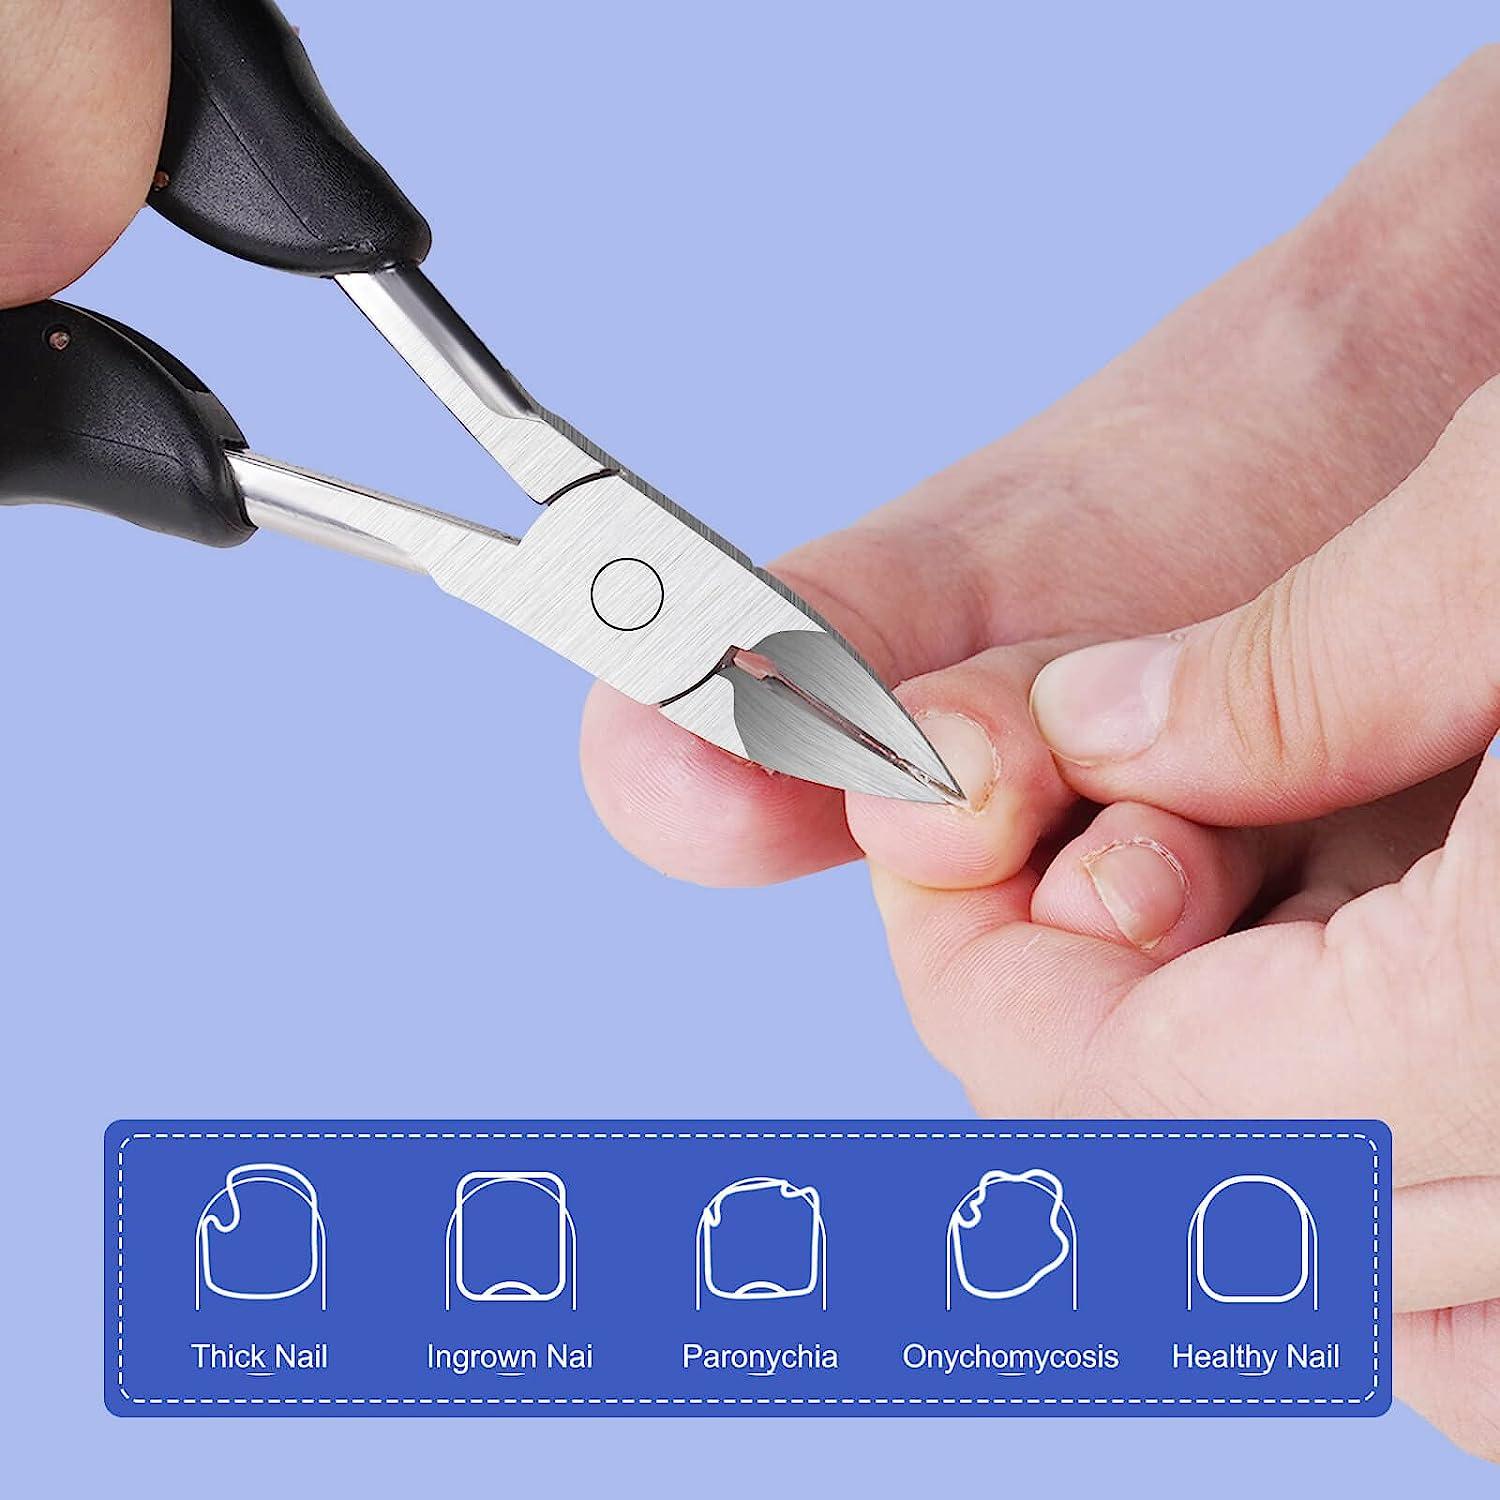 Toenail Clippers for Thick Ingrown Toenails Professional